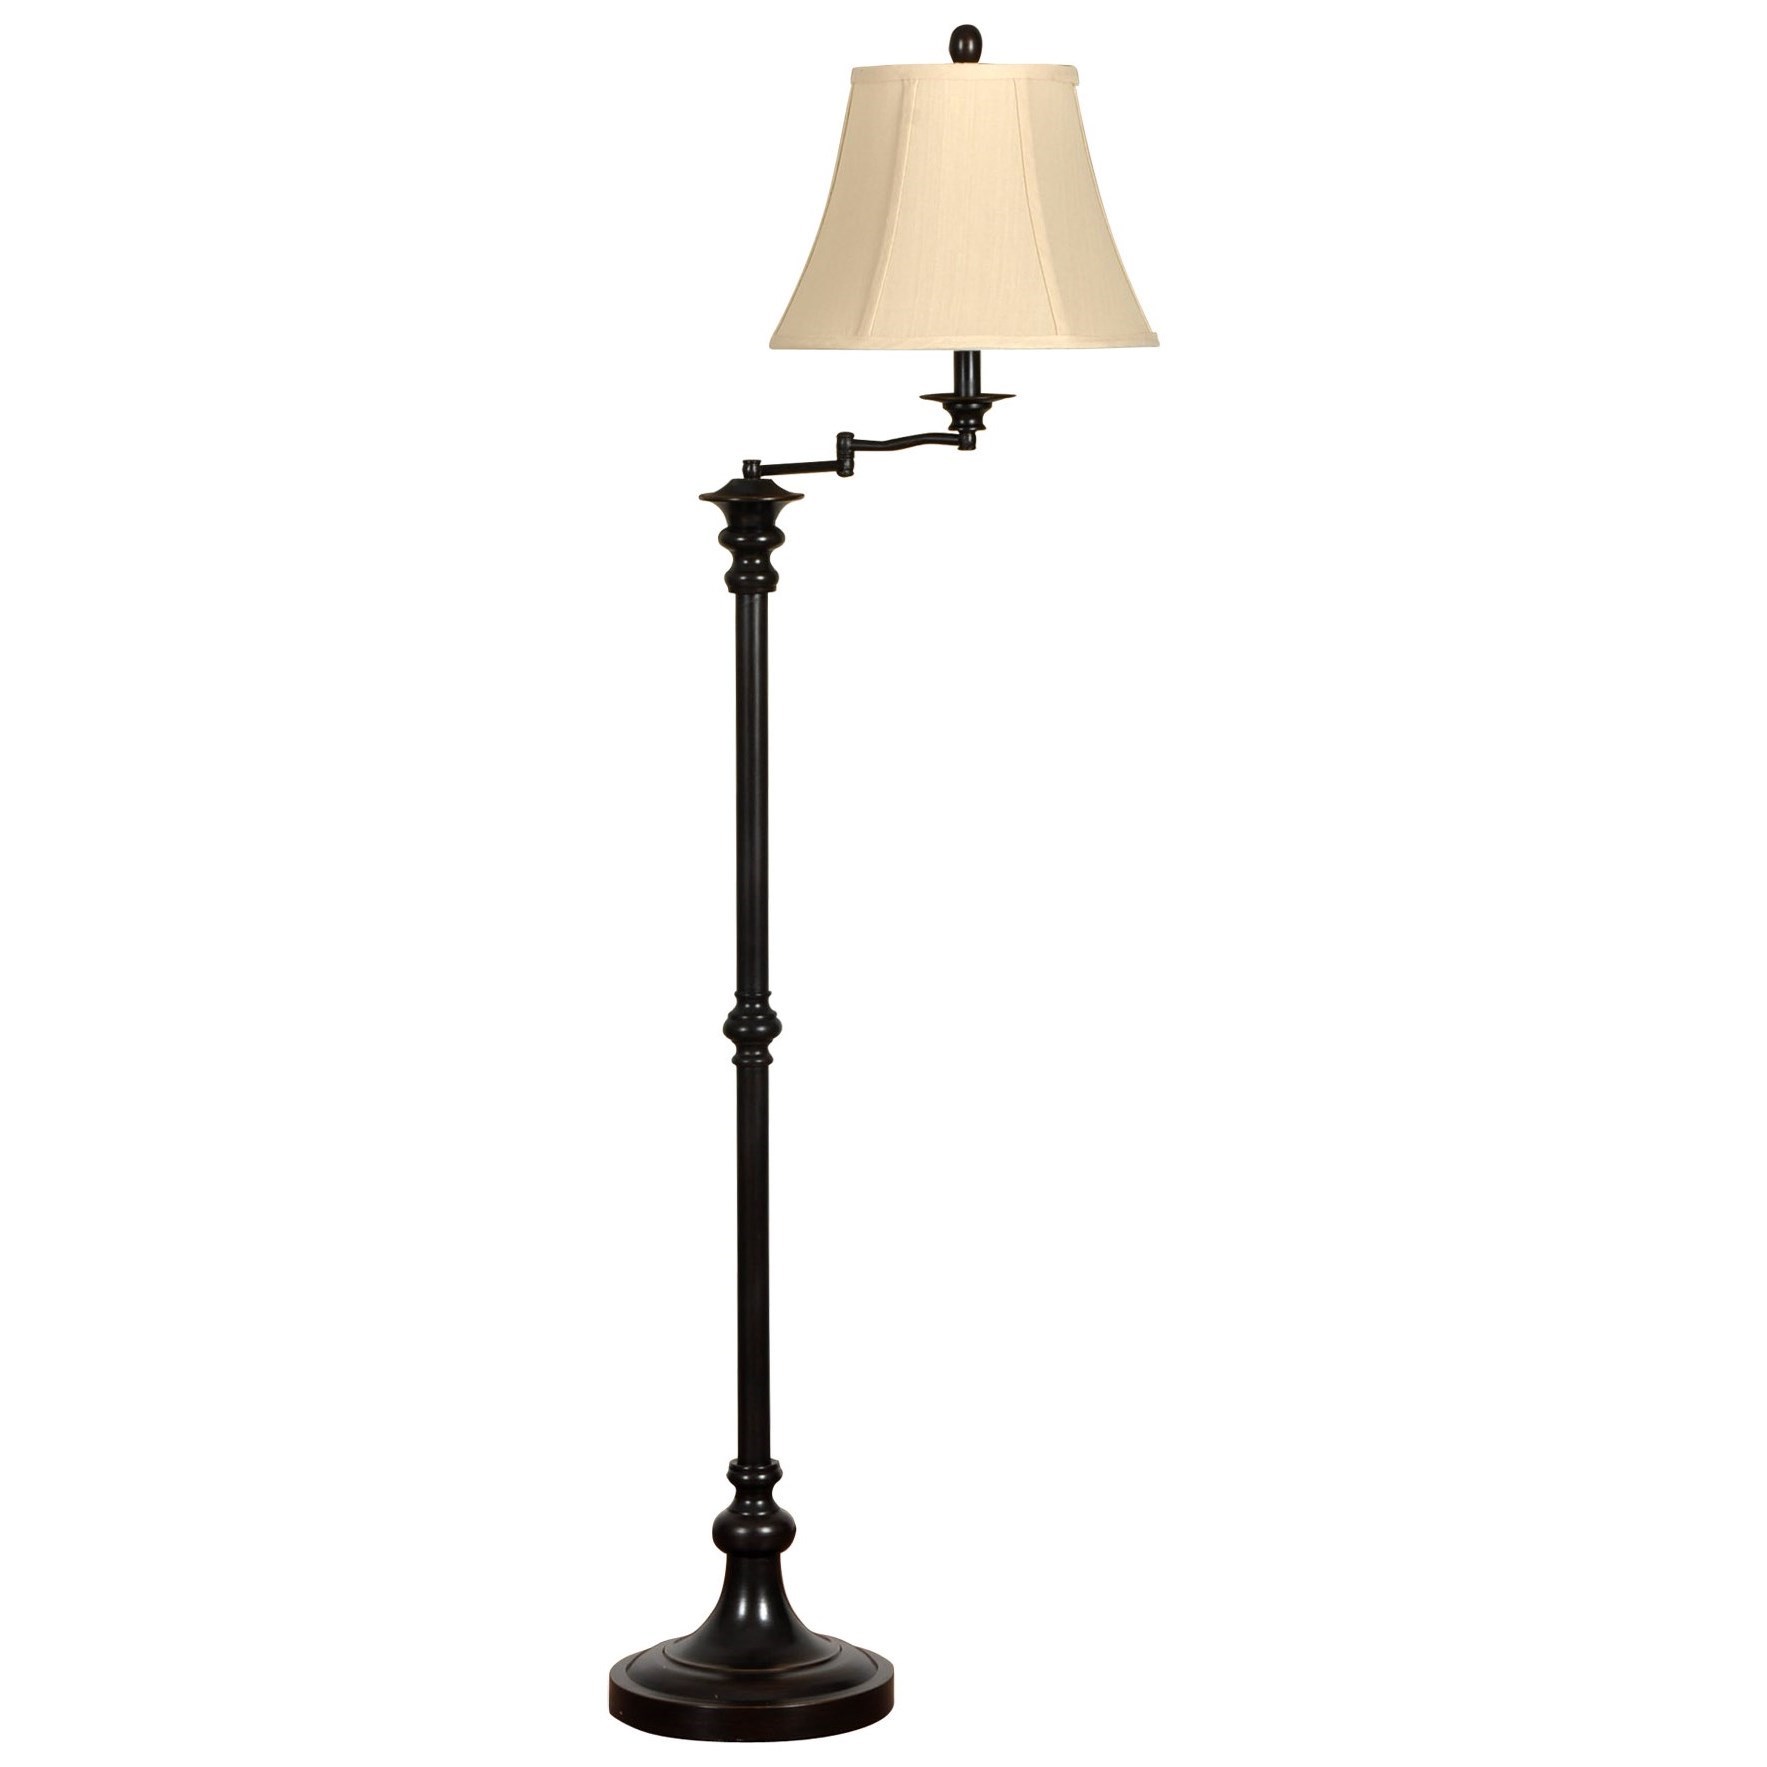 Metal Floor Lamp with Double Jointed Adjustable Arm